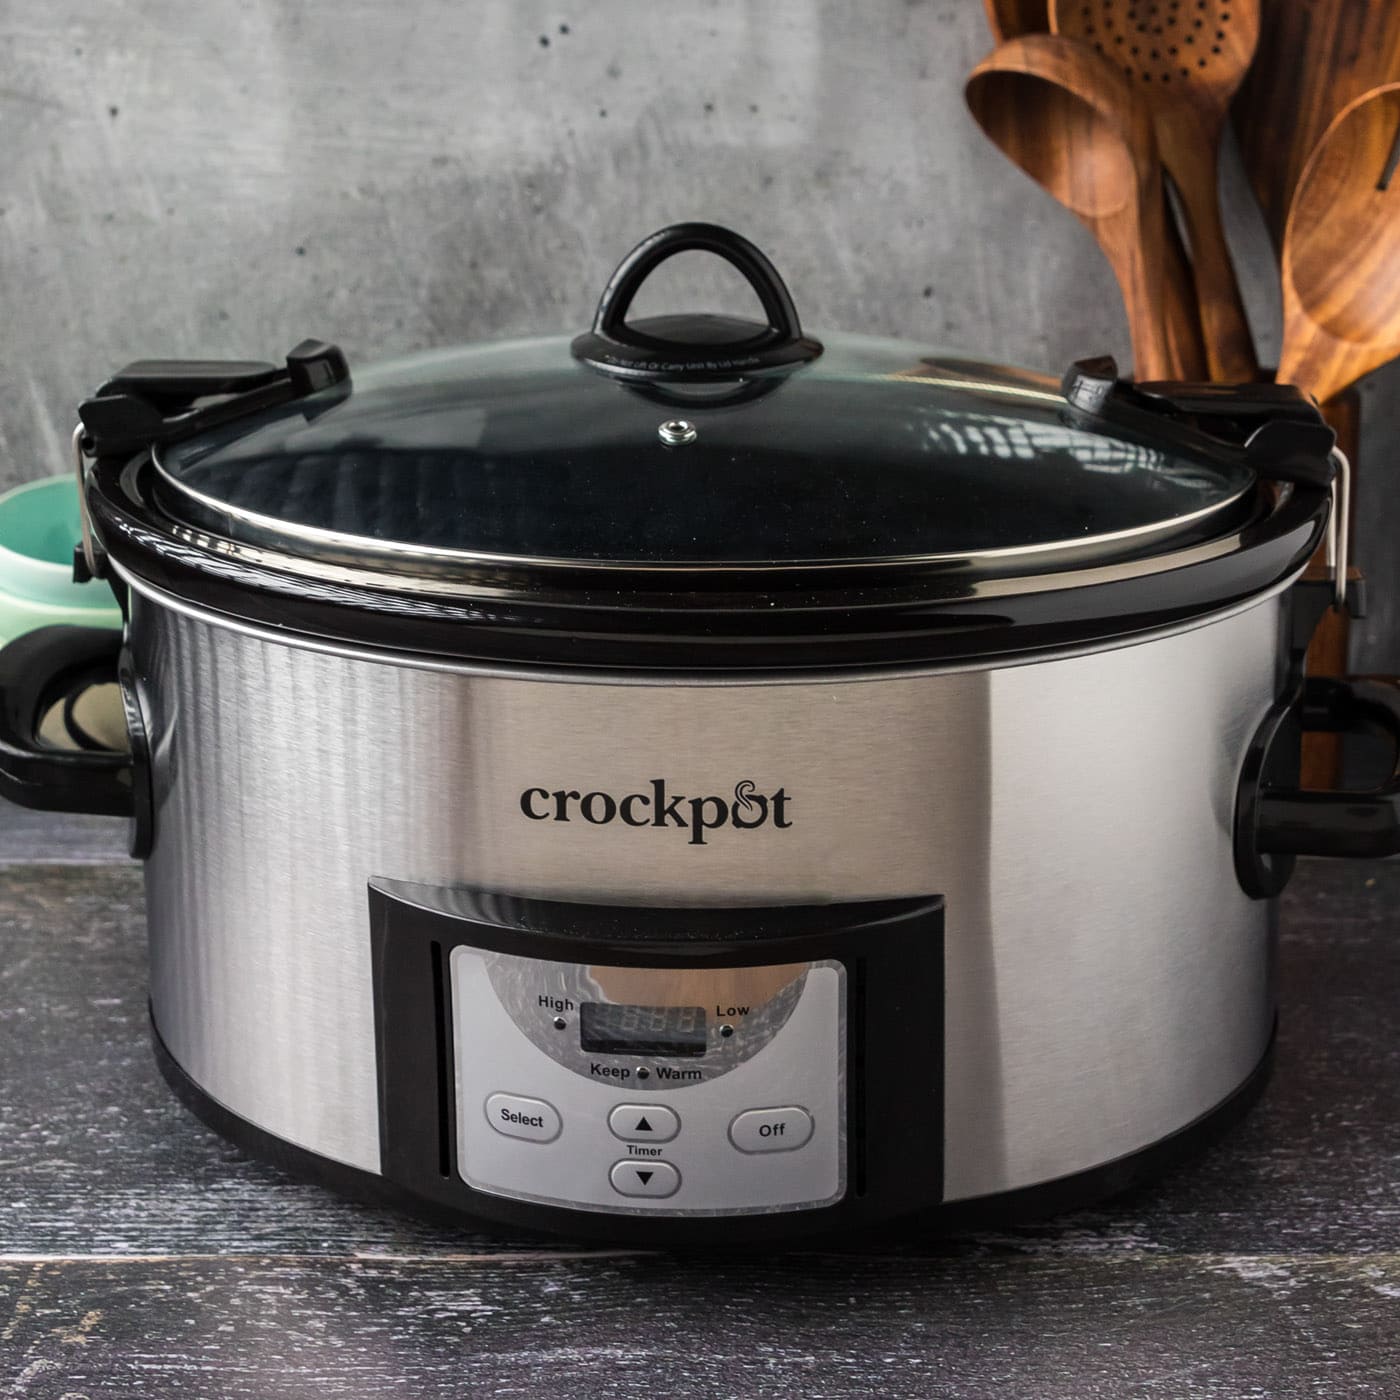 I found the smallest crockpot I've ever seen at a thrift store and now I'm  ready to slow cook my single serving of soup! (But fr, what kind of stuff  should I